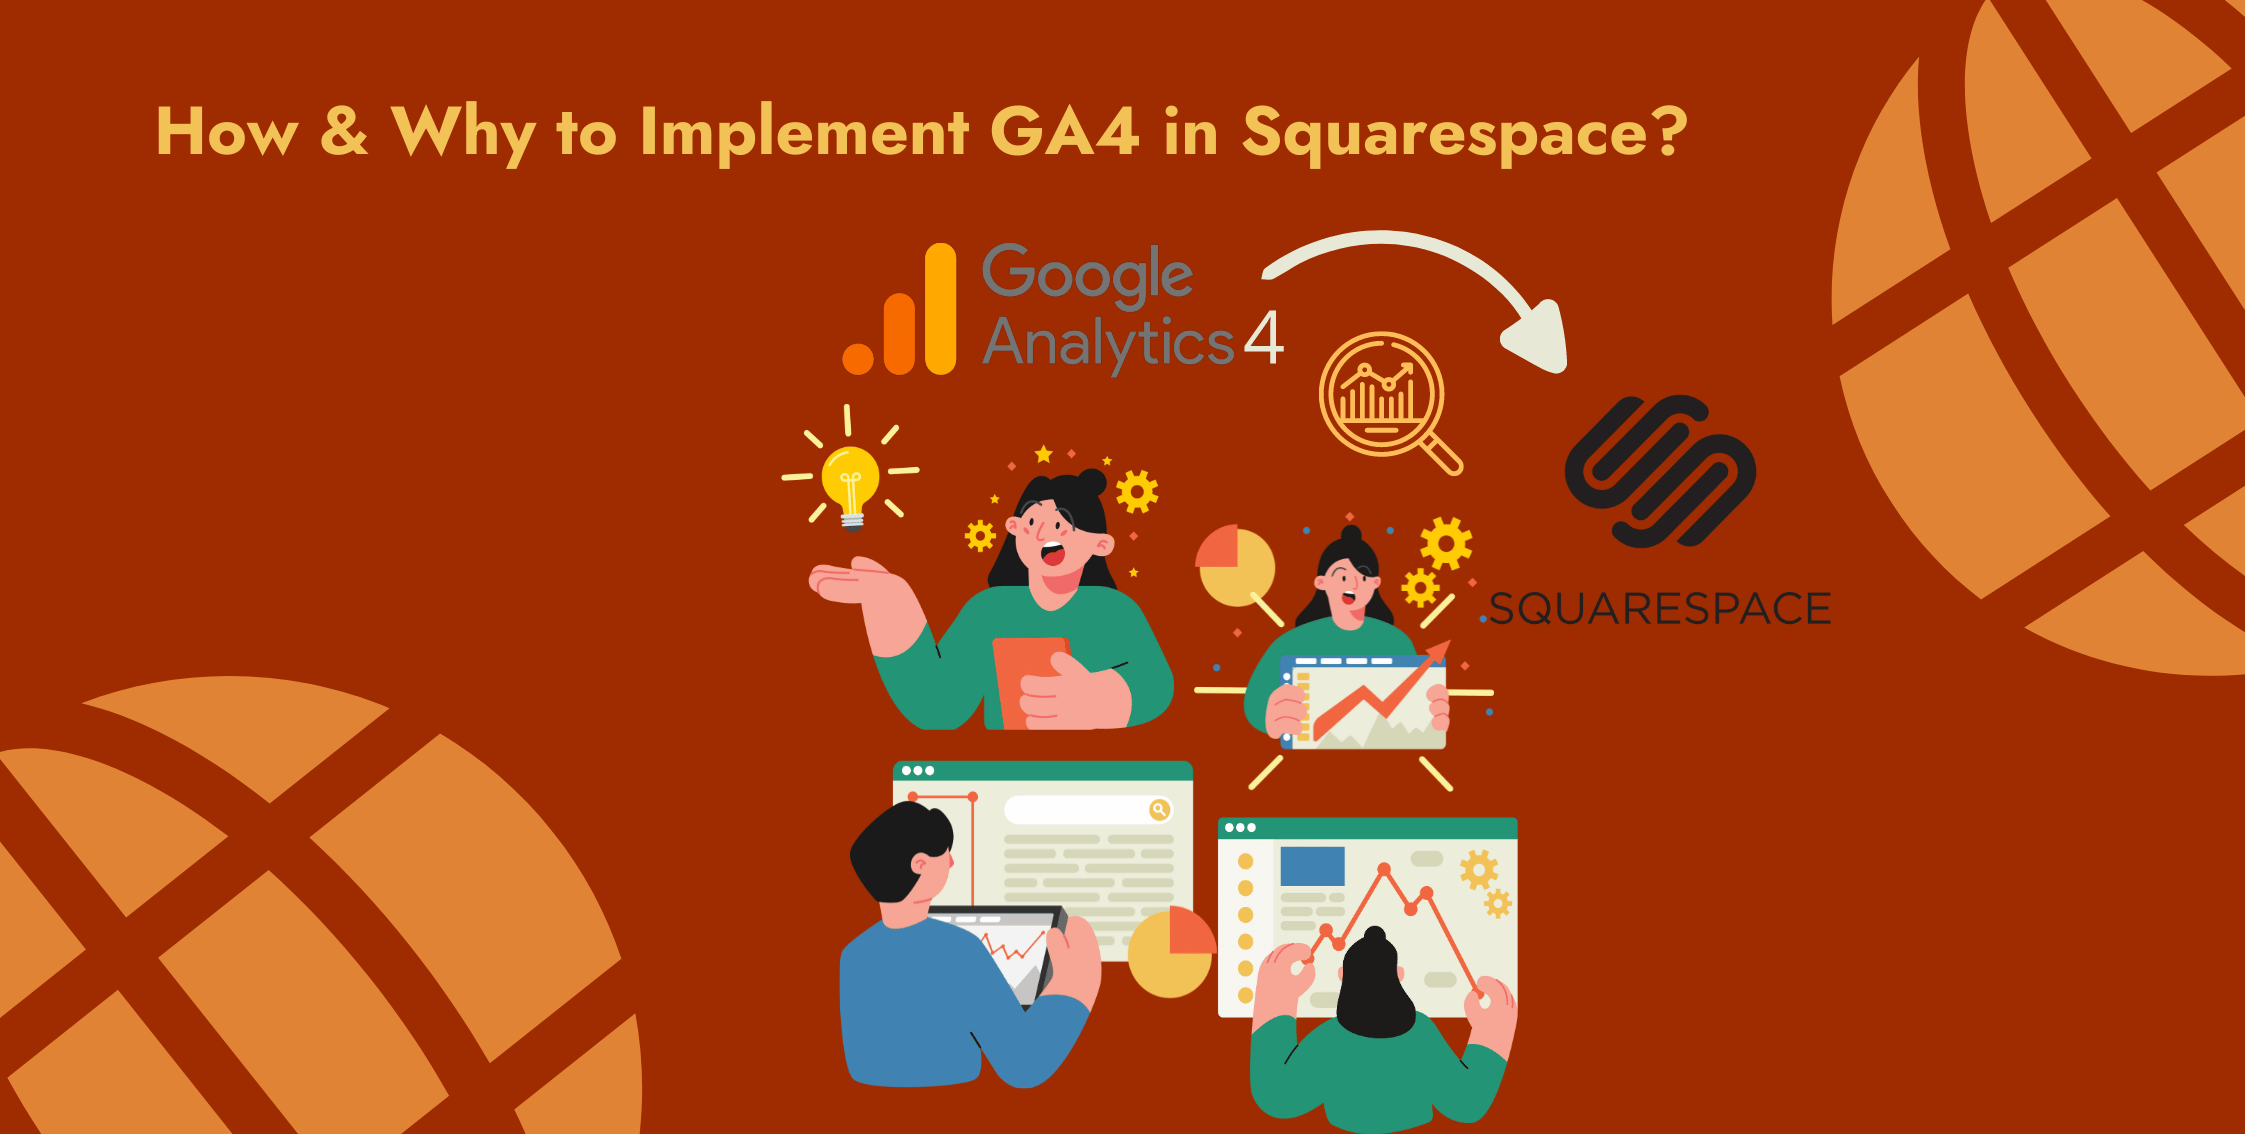 How & Why to Implement GA4 in Squarespace?